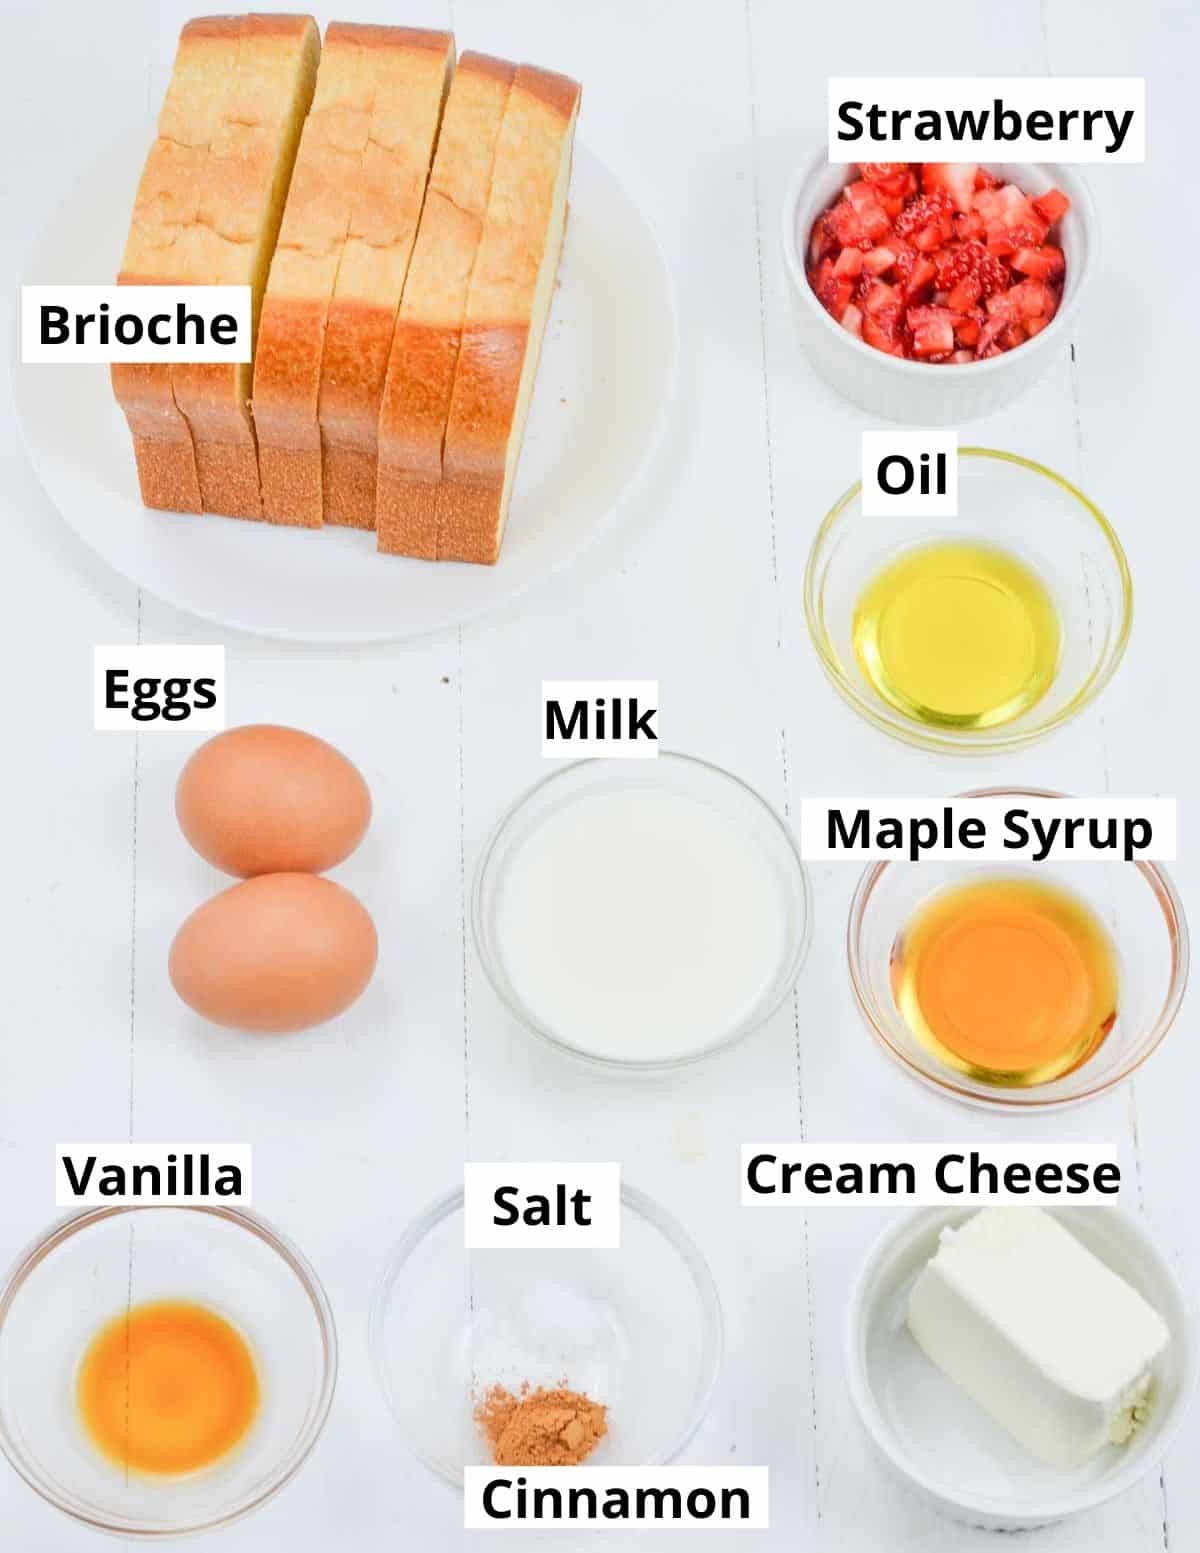 Ingredients for making stuffed french toast shown in the image.